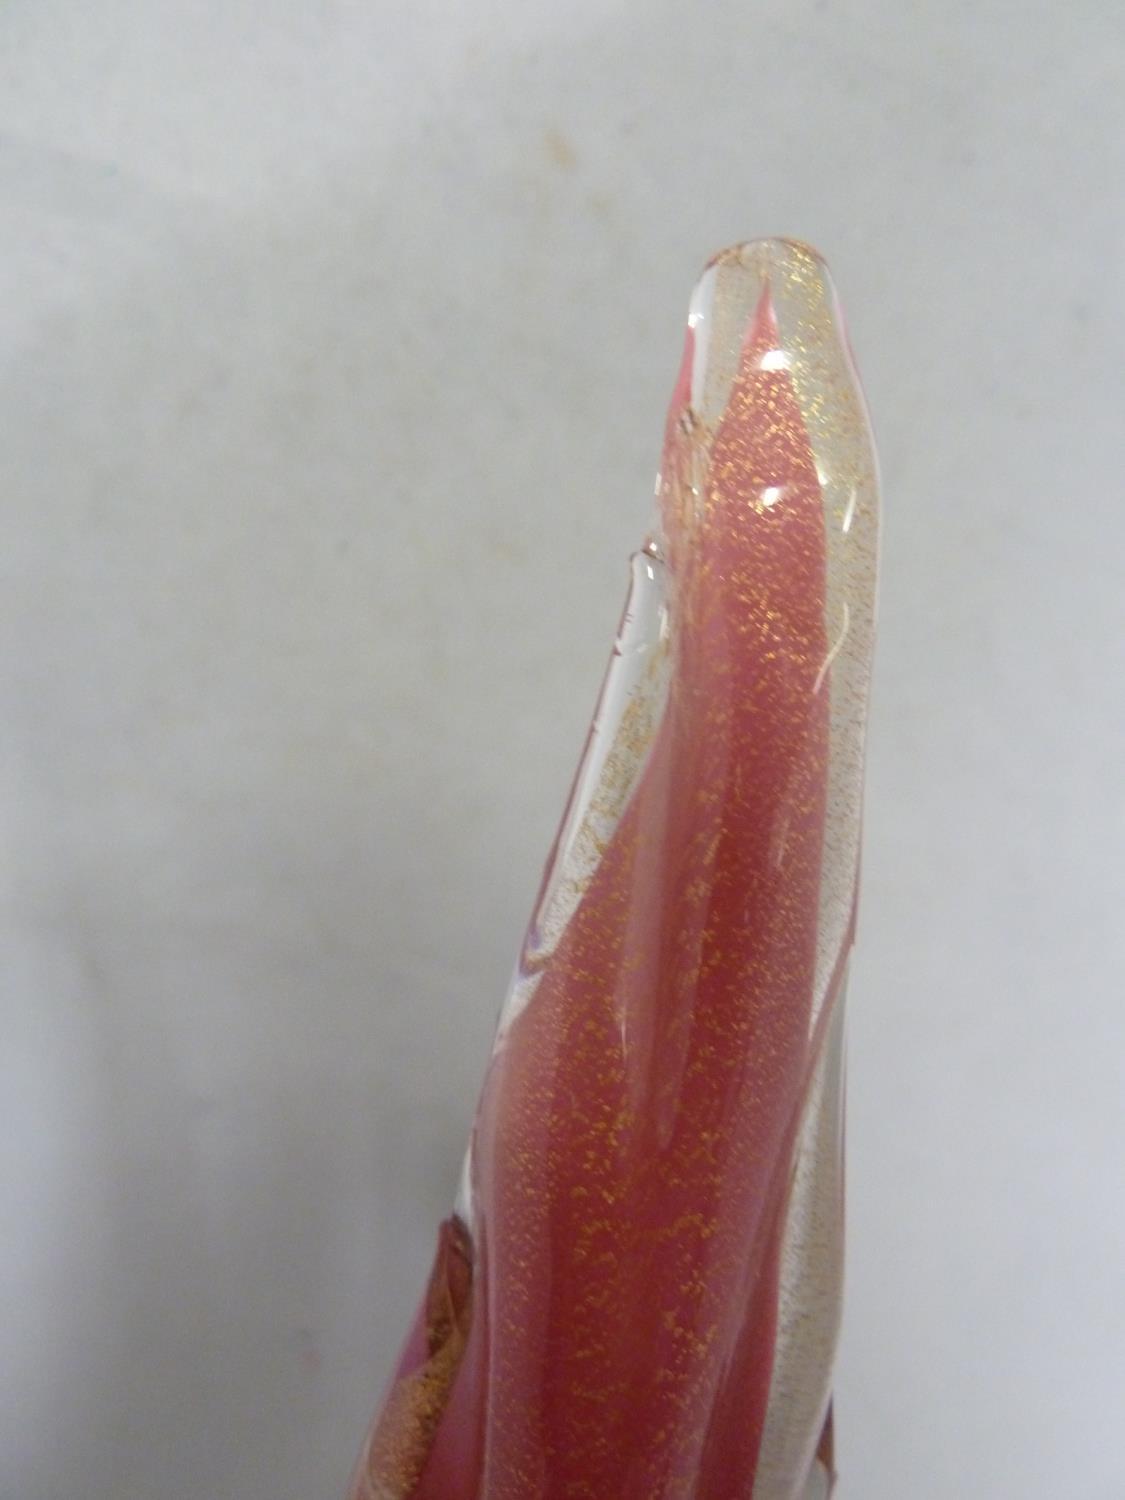 Murano glass - Pheasant - modelled standing with elongated tail upright, in pink and aventurine gold - Image 5 of 11